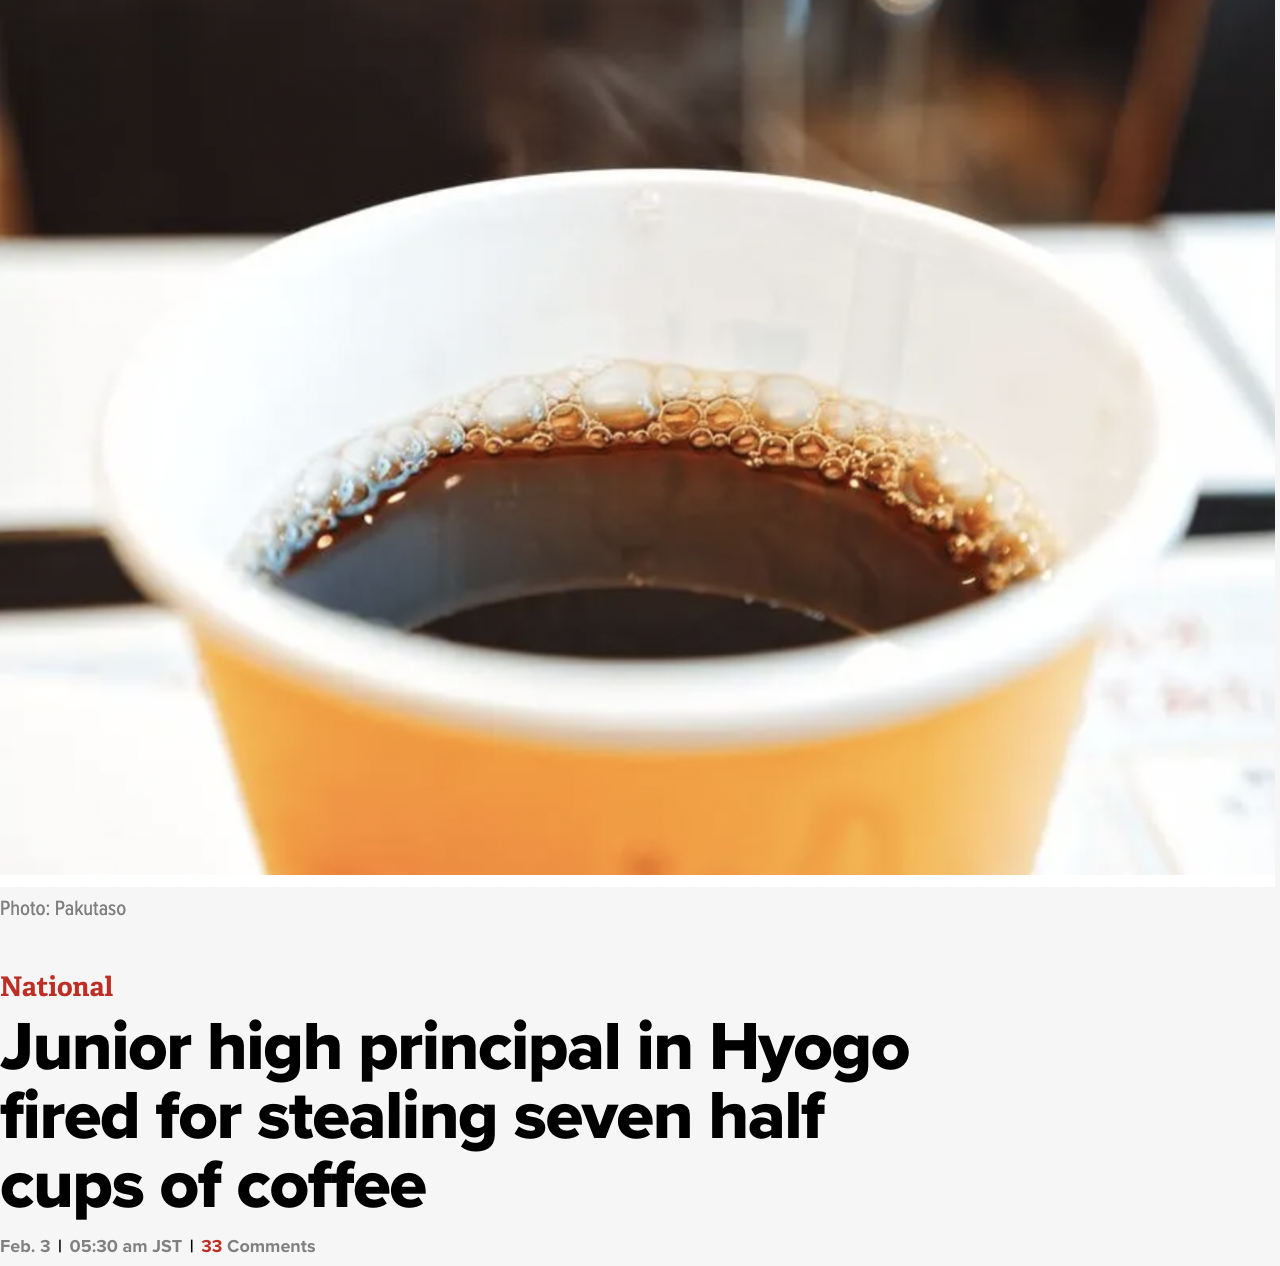 coffee cup - Photo Pakutaso National Junior high principal in Hyogo fired for stealing seven half cups of coffee Feb. 3 1 Jst 1 33